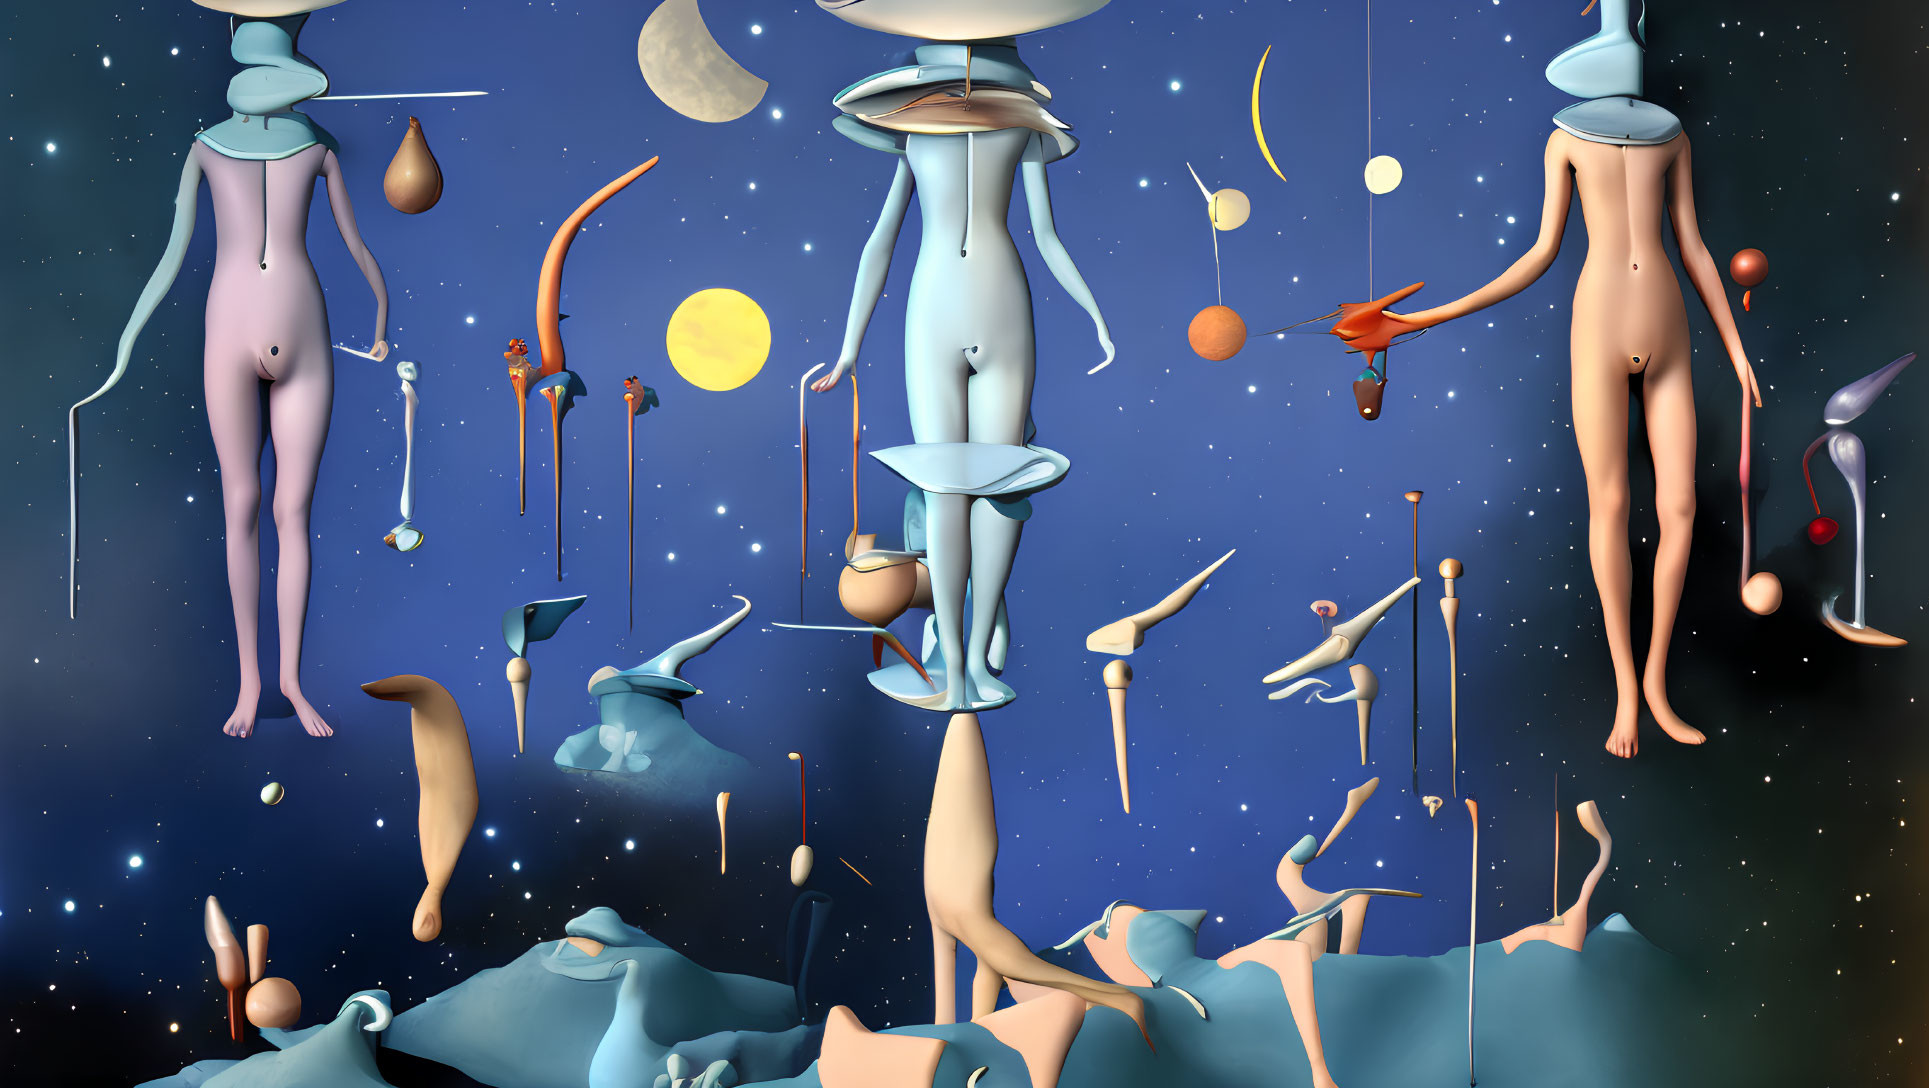 Abstract surreal artwork: elongated humanoid figures and celestial objects in cosmic scene